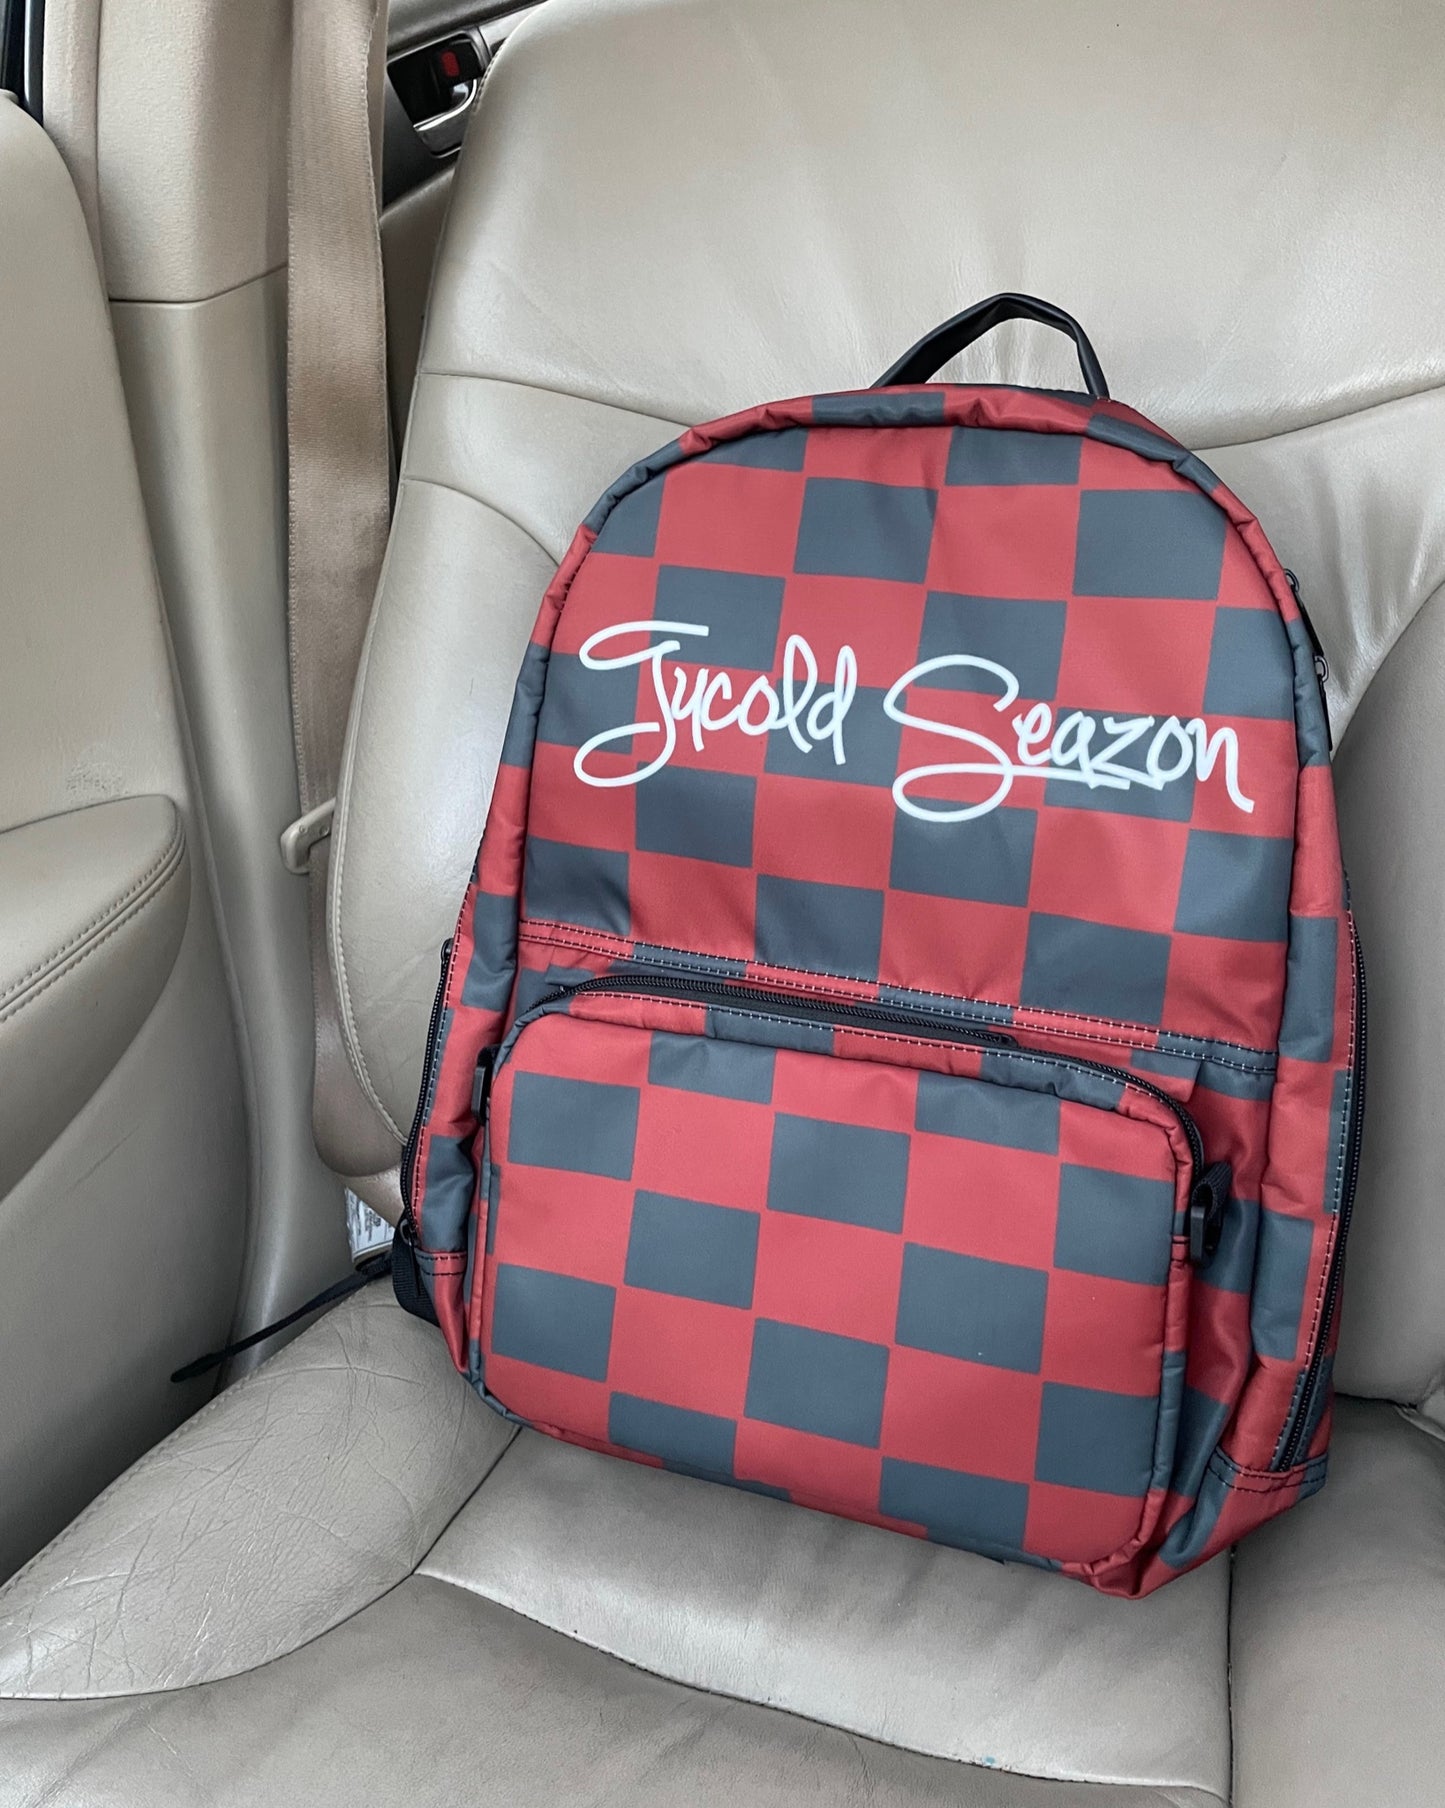 Tucold Seazon Checkered Original Backpack